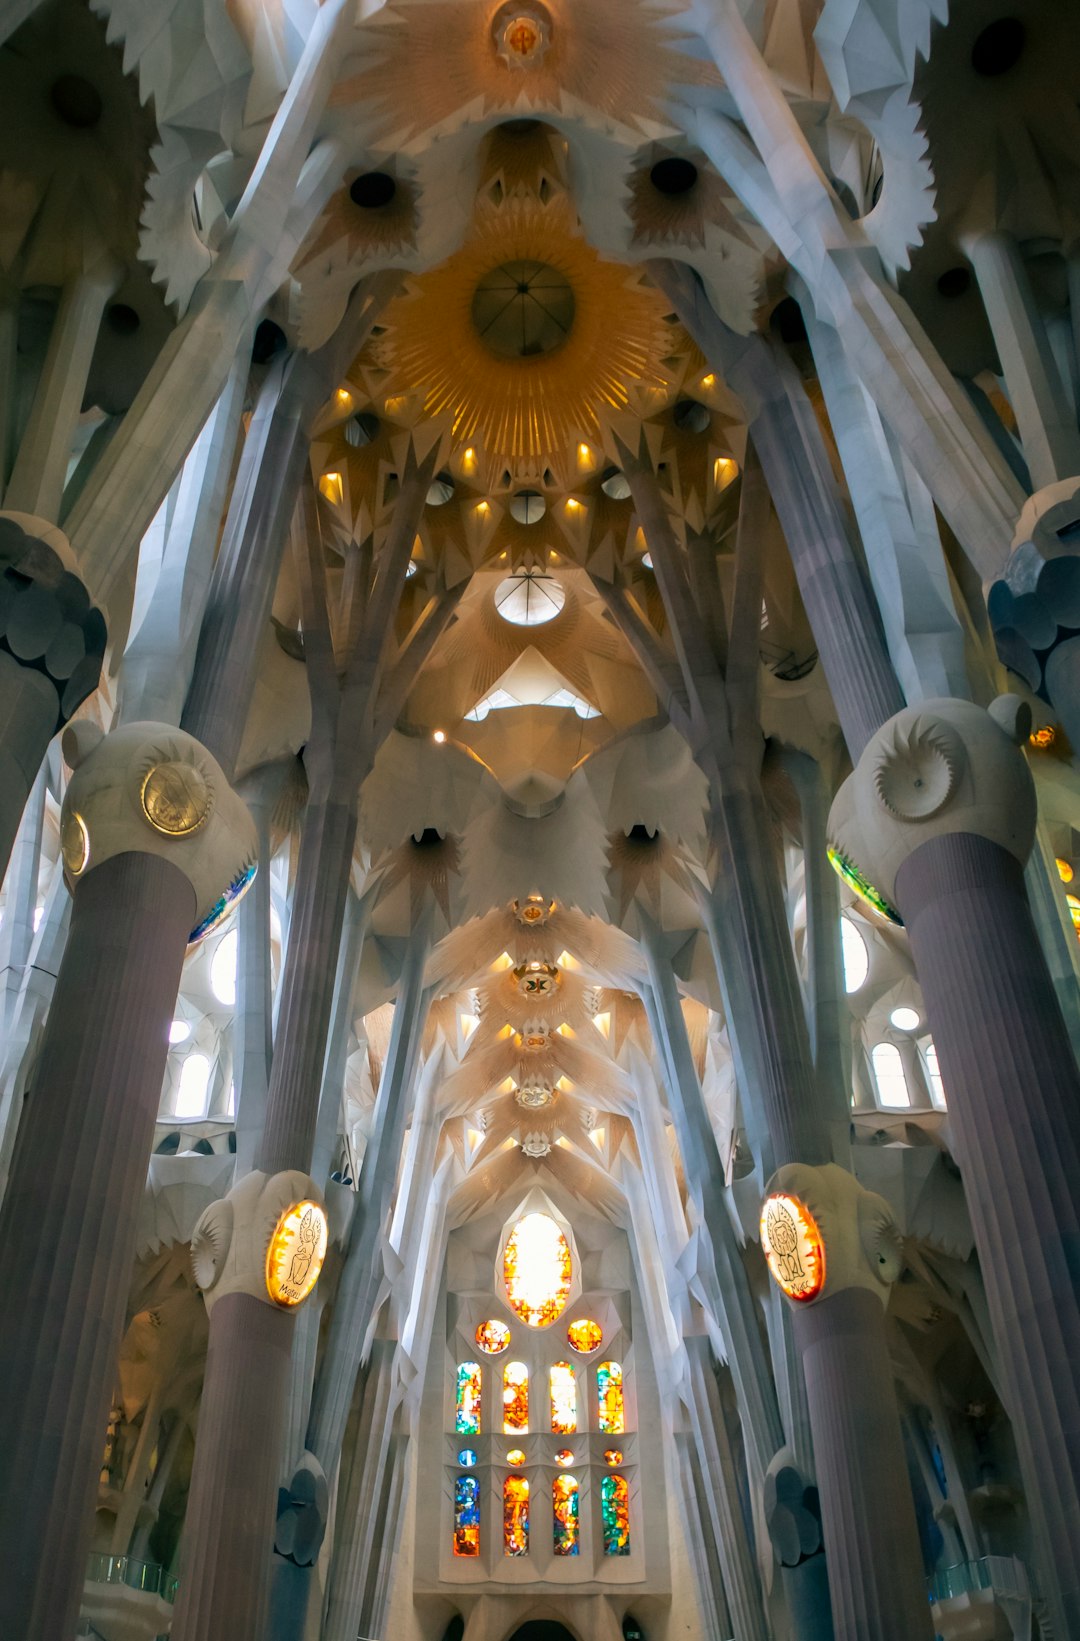 travelers stories about Place of worship in La Sagrada Familia, Spain